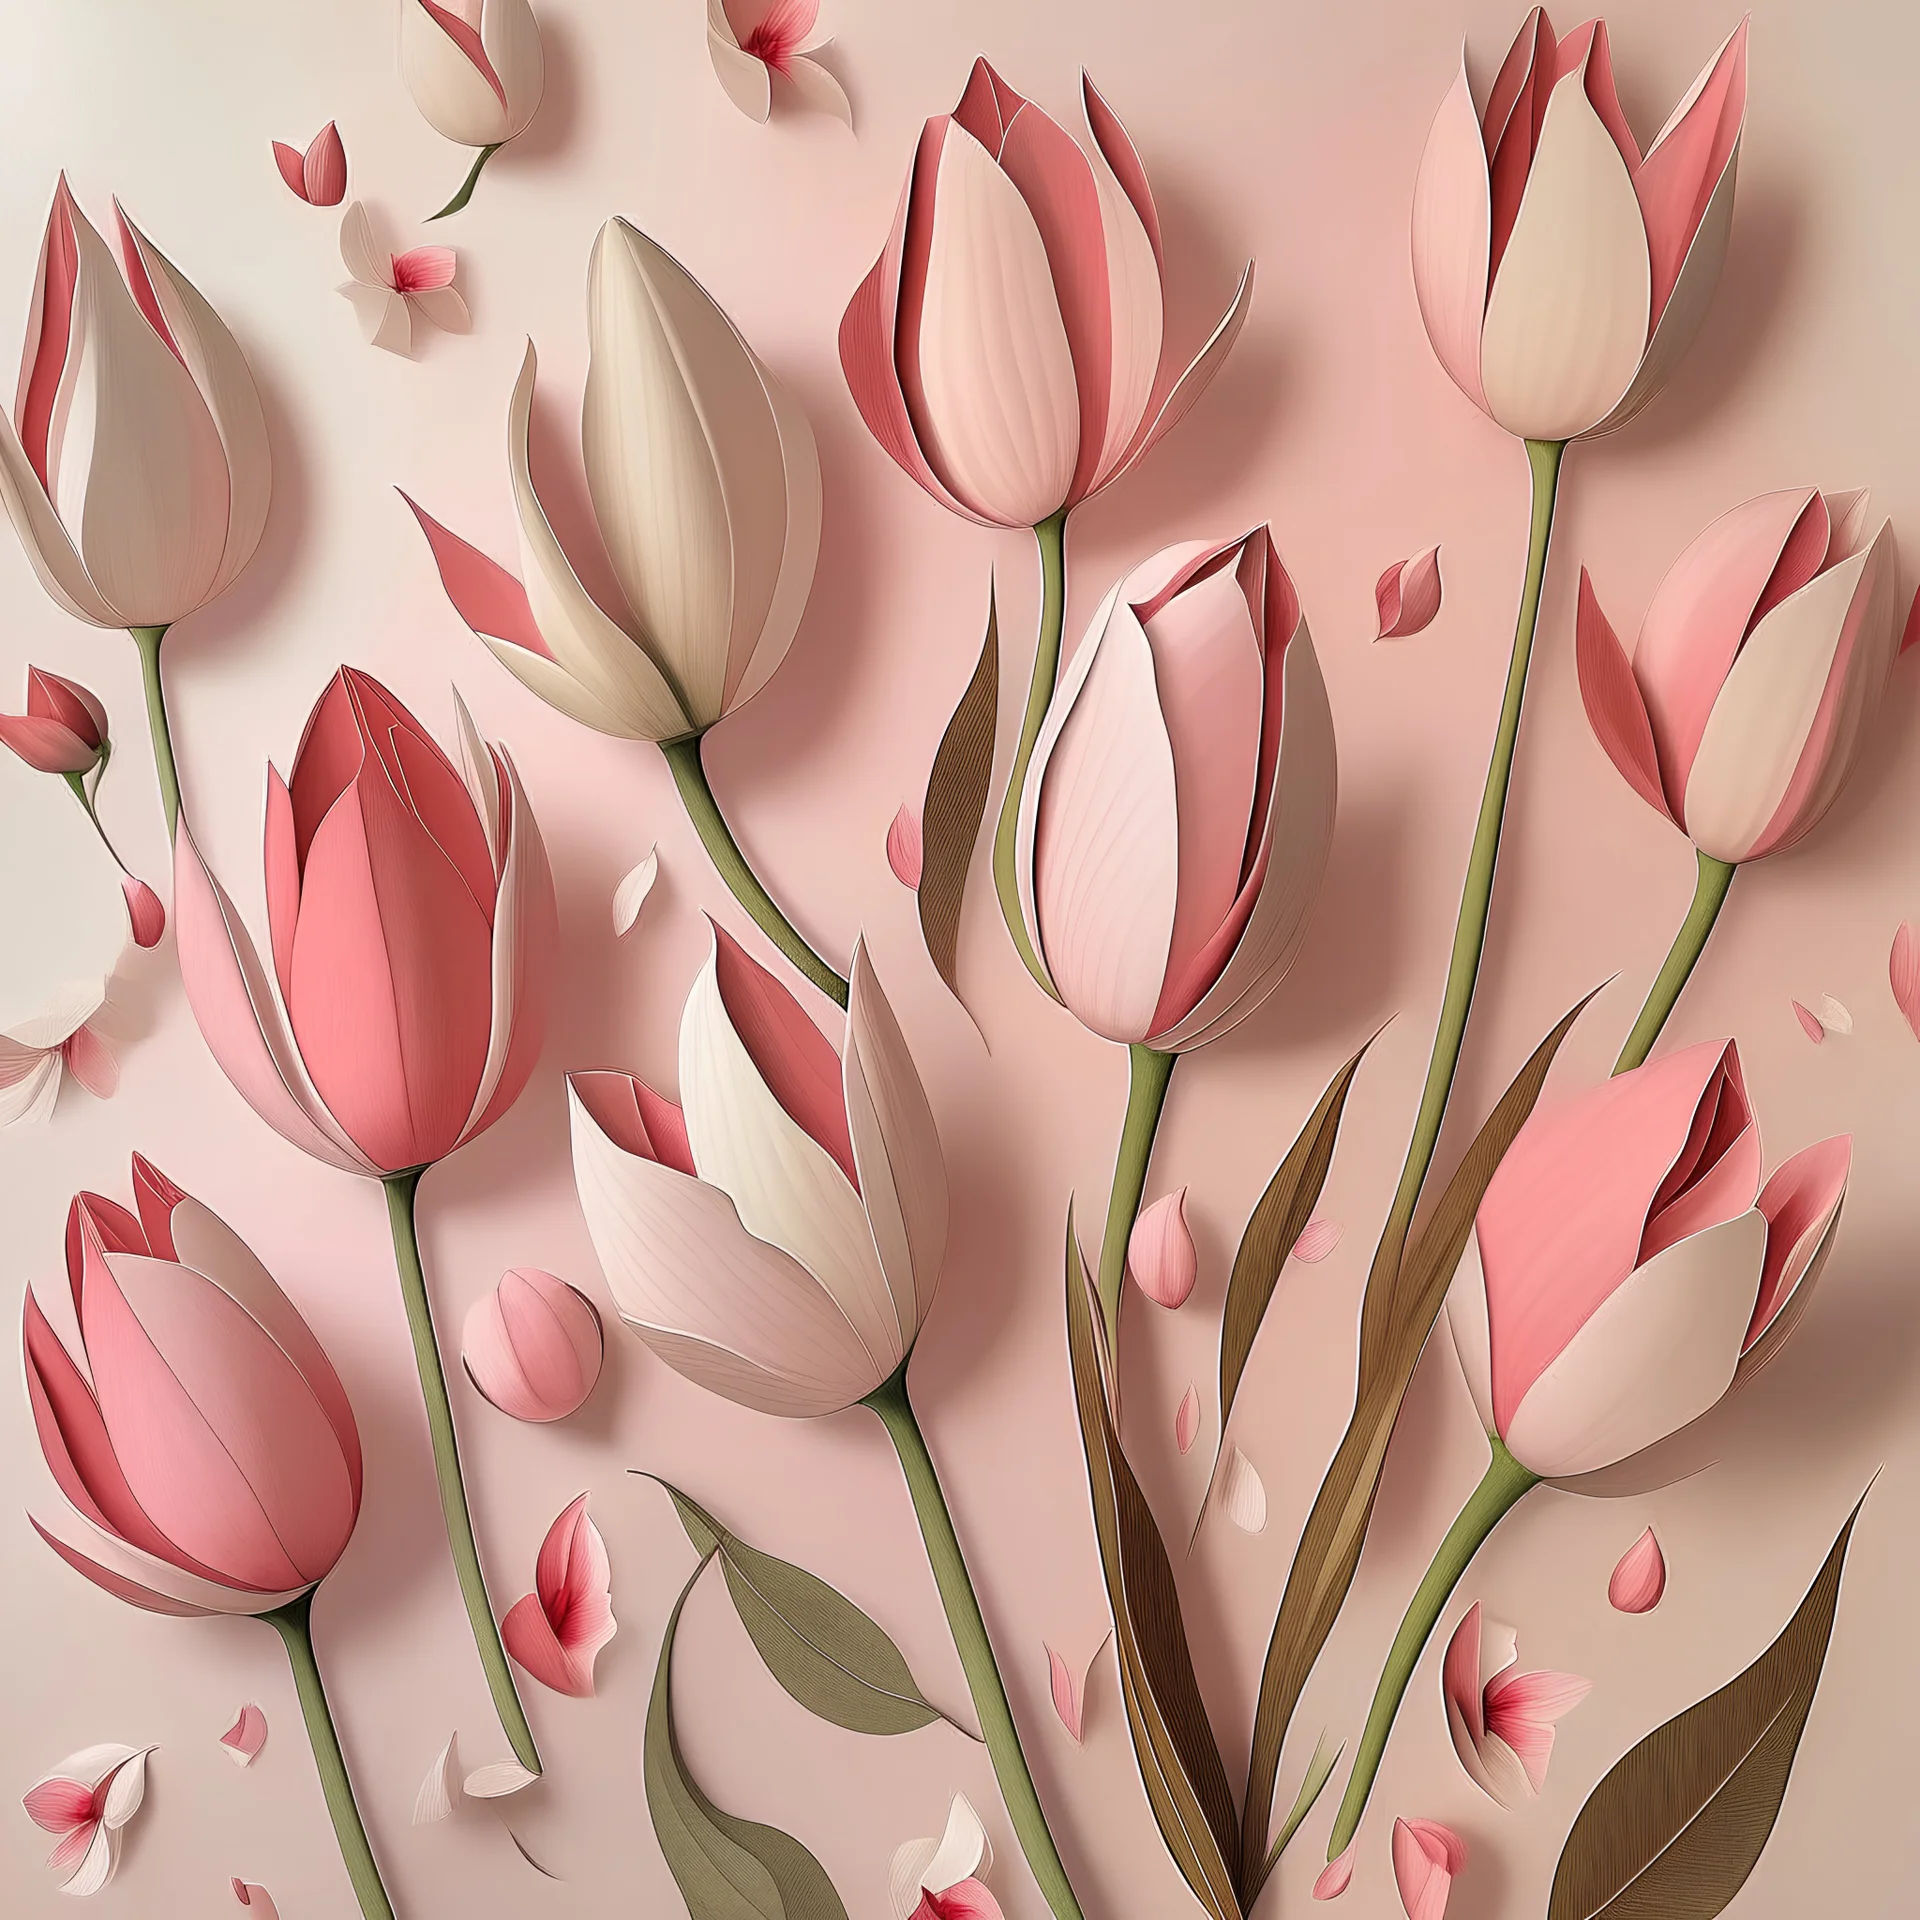 Tulips ,moodboard ,aesthetic tulips, light pink and creamy color collage, pattern wrapped in paper, flying petals embroied